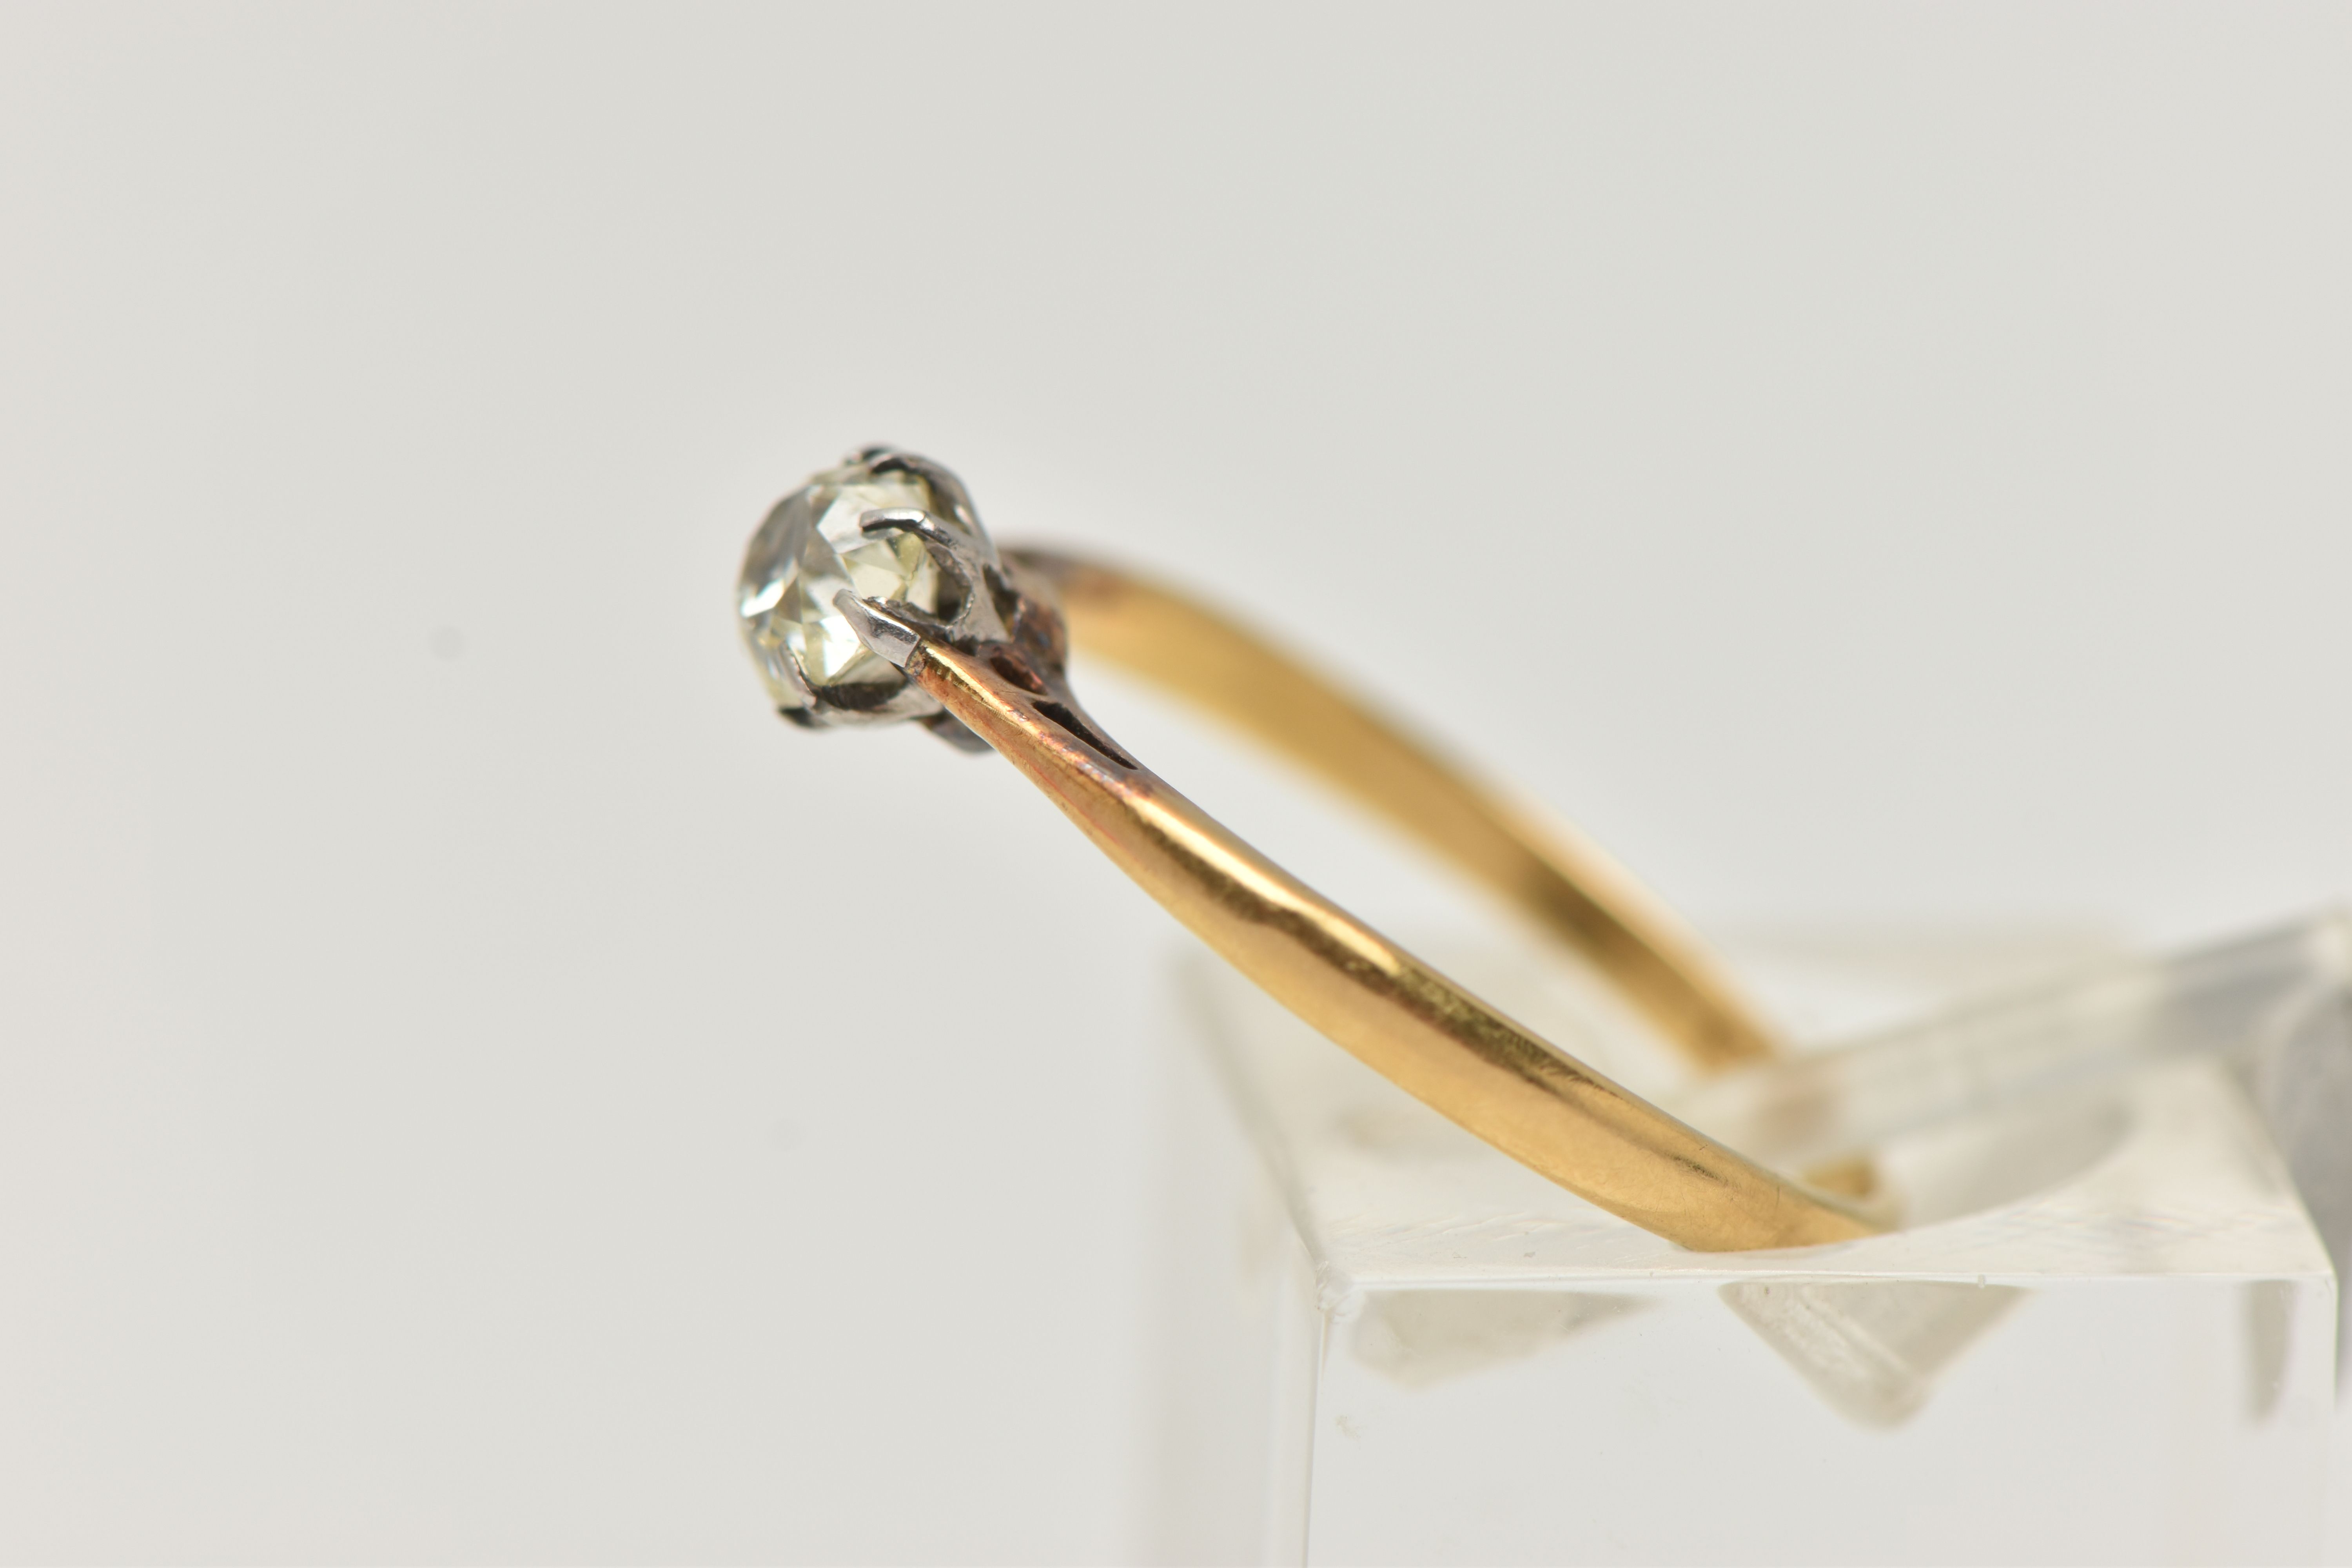 A YELLOW METAL SINGLE STONE DIAMOND RING, old cut diamond, measuring approximately 4.7mm x 4.6 x 3. - Image 2 of 4